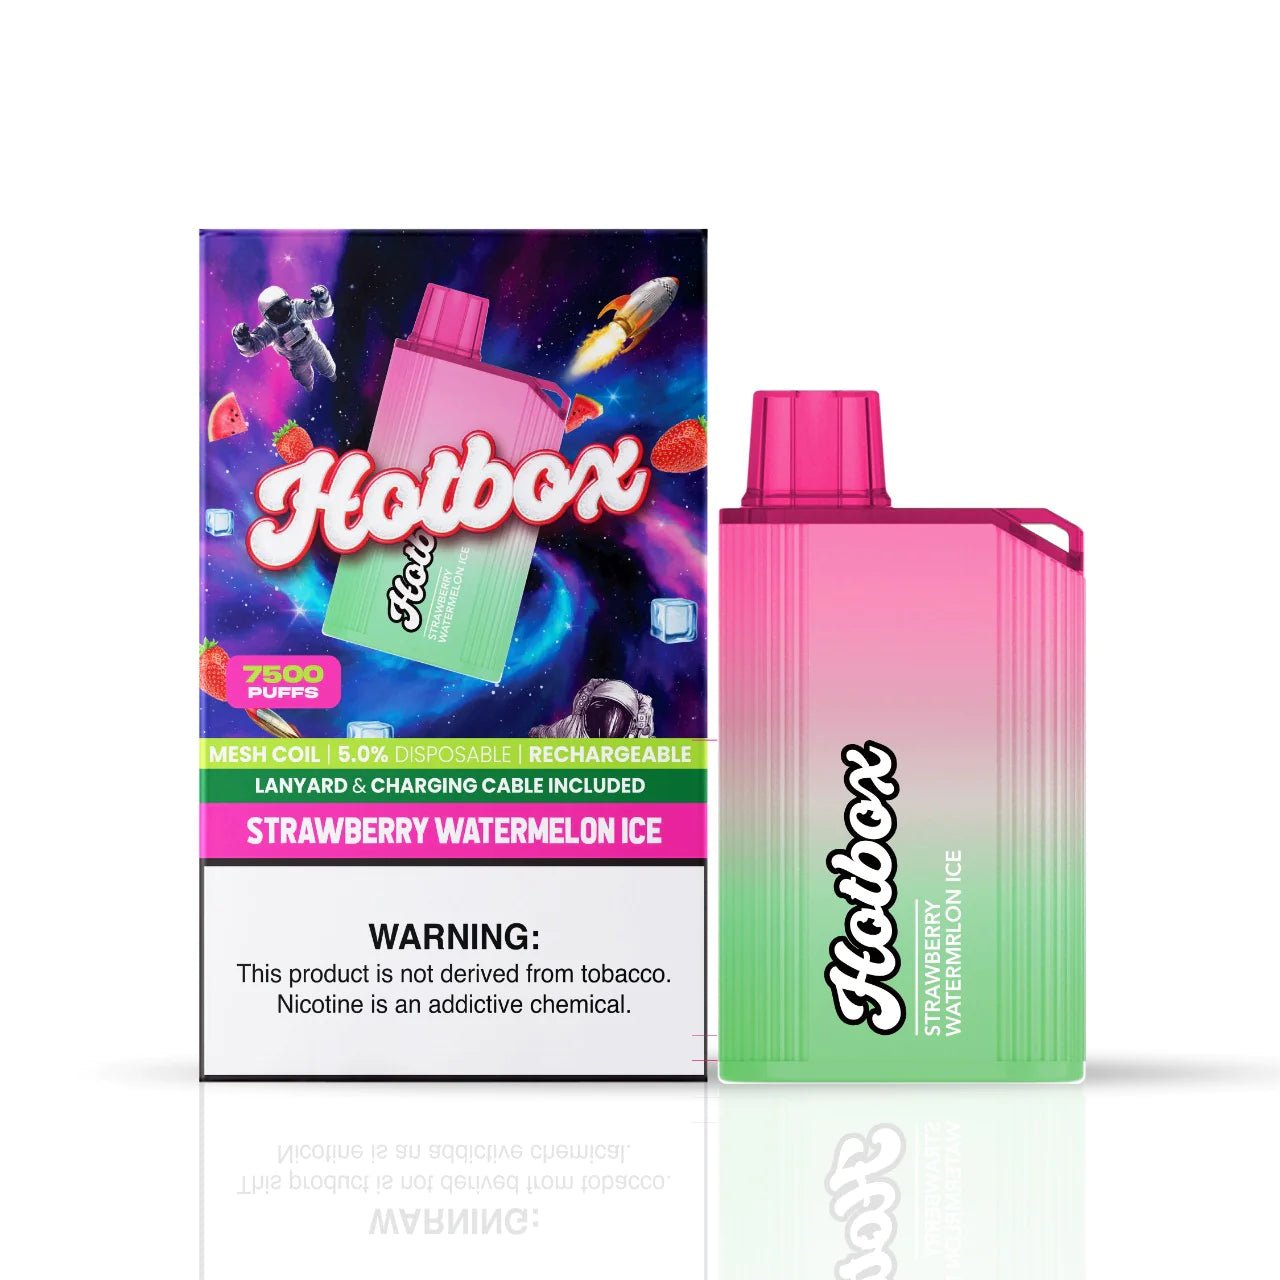 Load image into Gallery viewer, Puff Hotbox 7500 Strawberry Watermelon Ice - Vape Mobs
